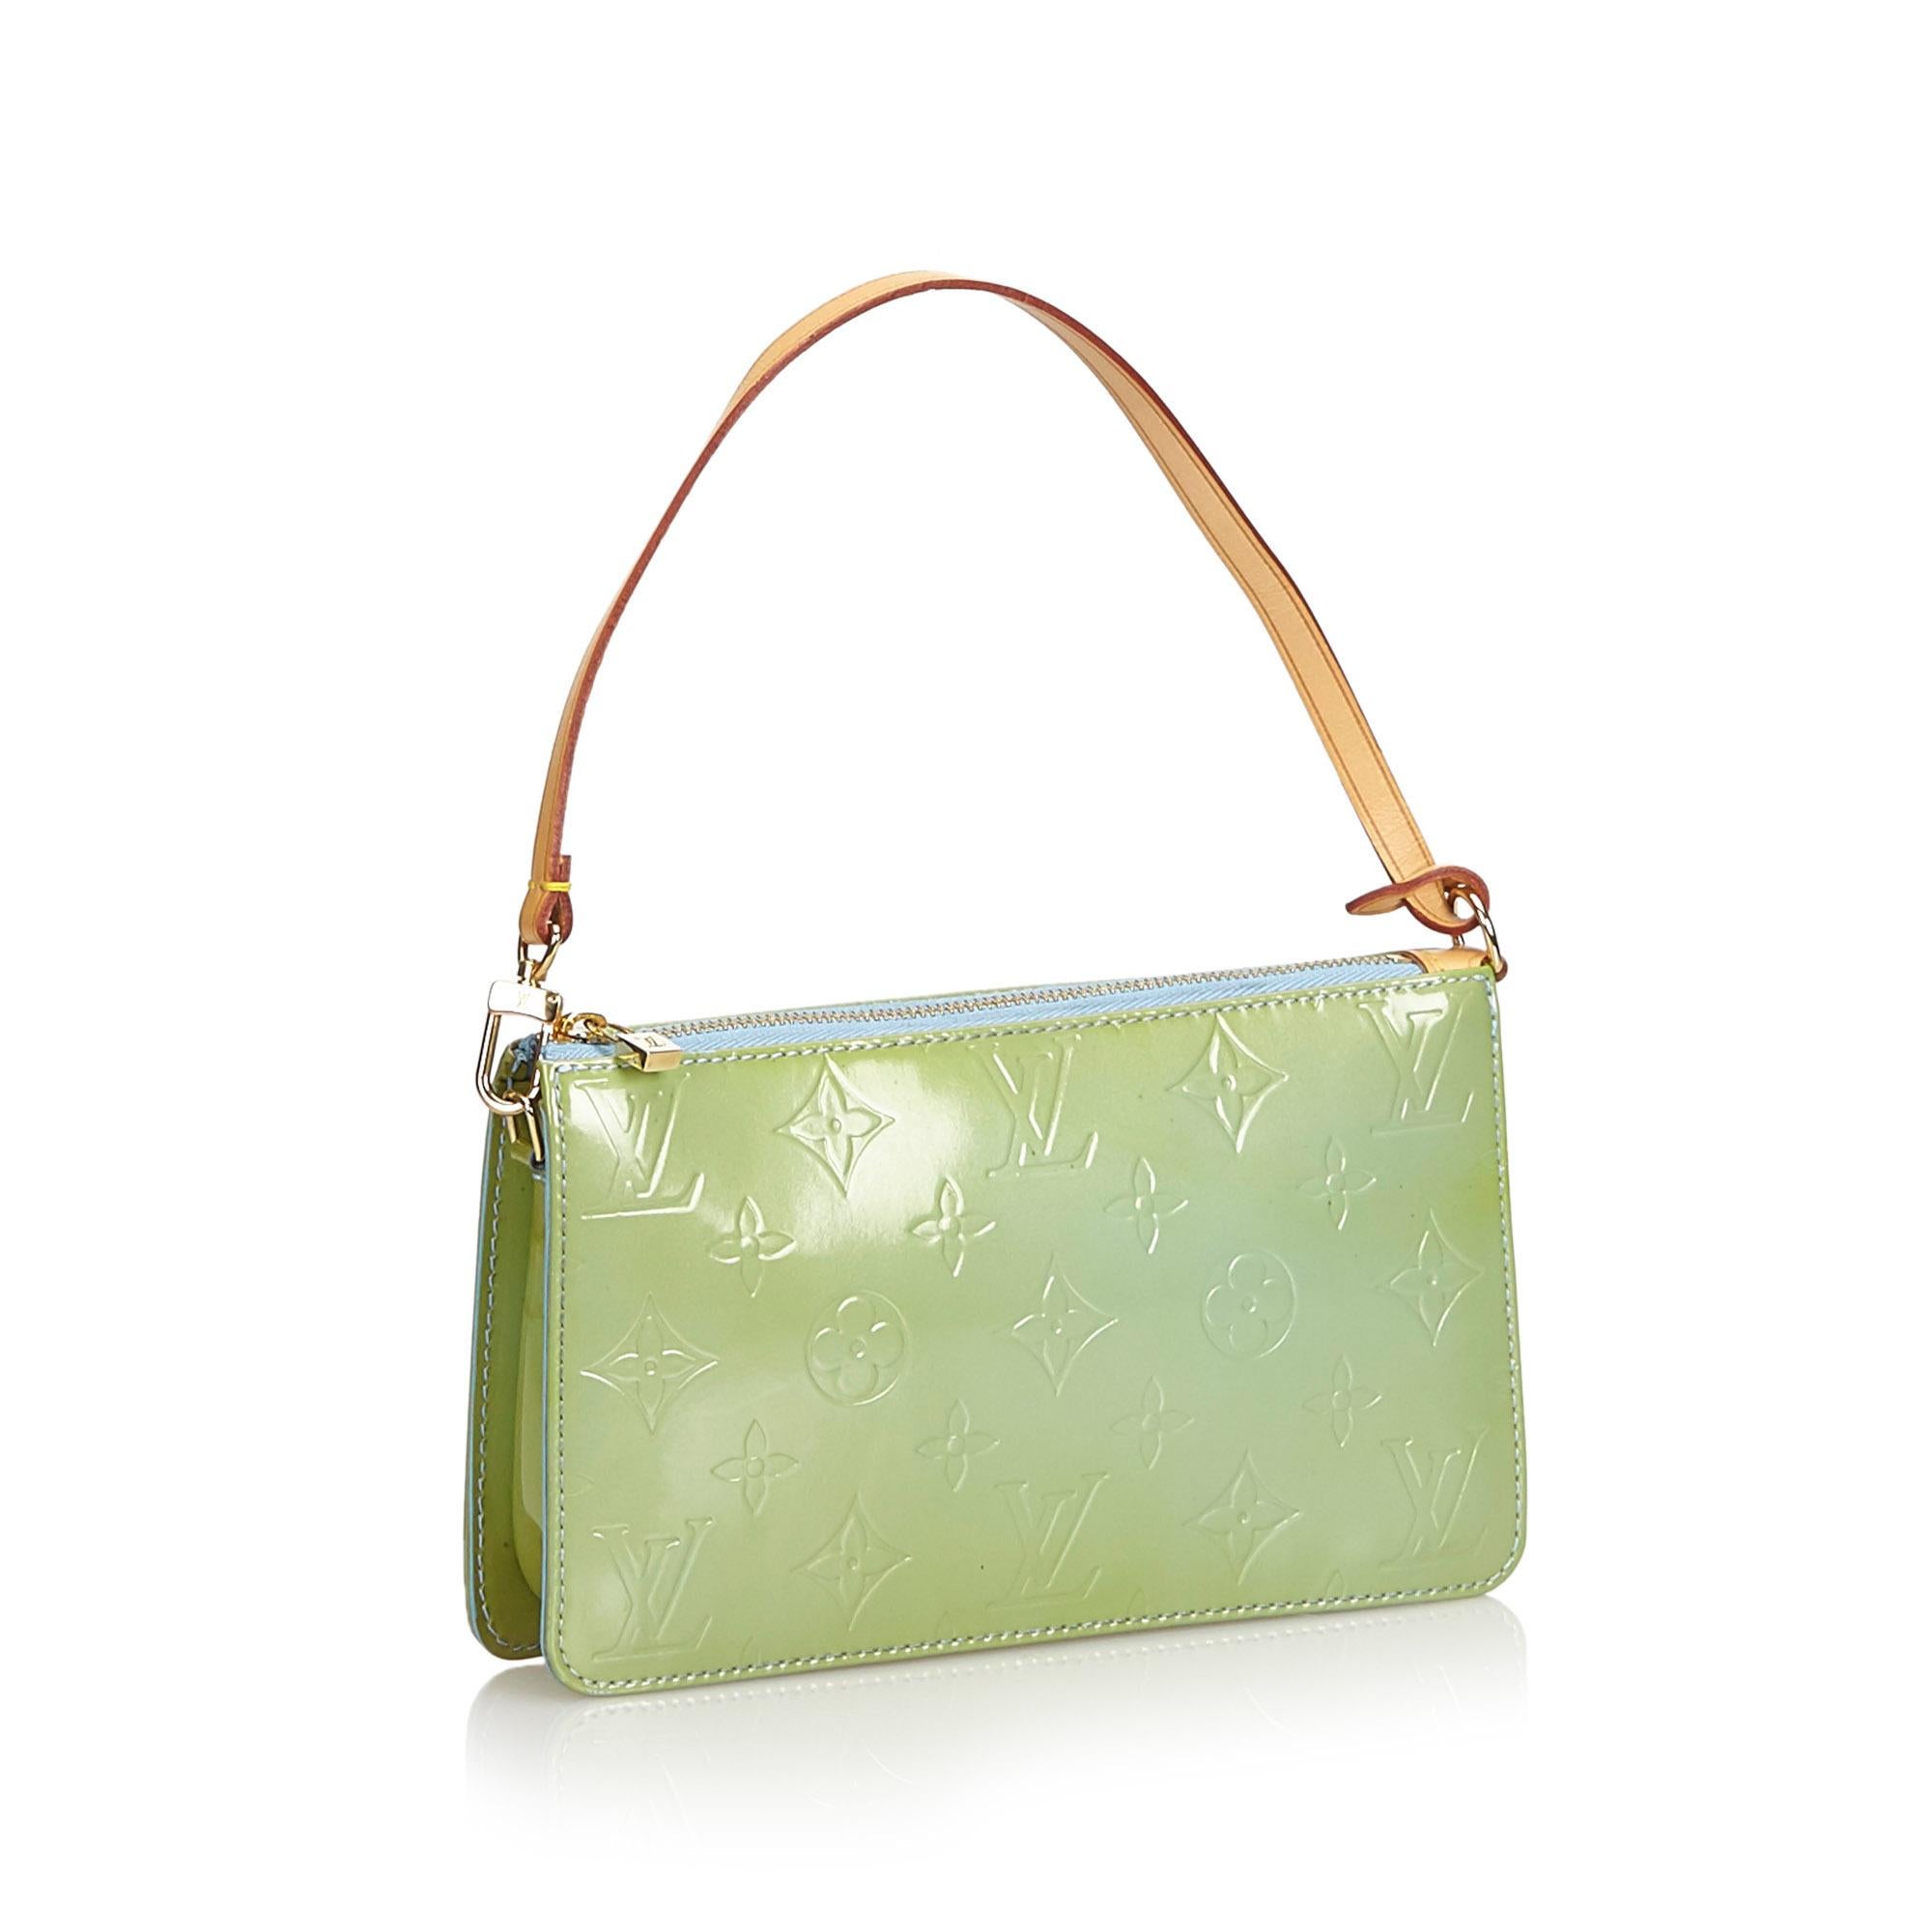 The Lexington features a vernis leather body, a flat leather strap, and a top zip closure. It carries as B+ condition rating.

Inclusions: 
This item does not come with inclusions.


Louis Vuitton pieces do not come with an authenticity card�please